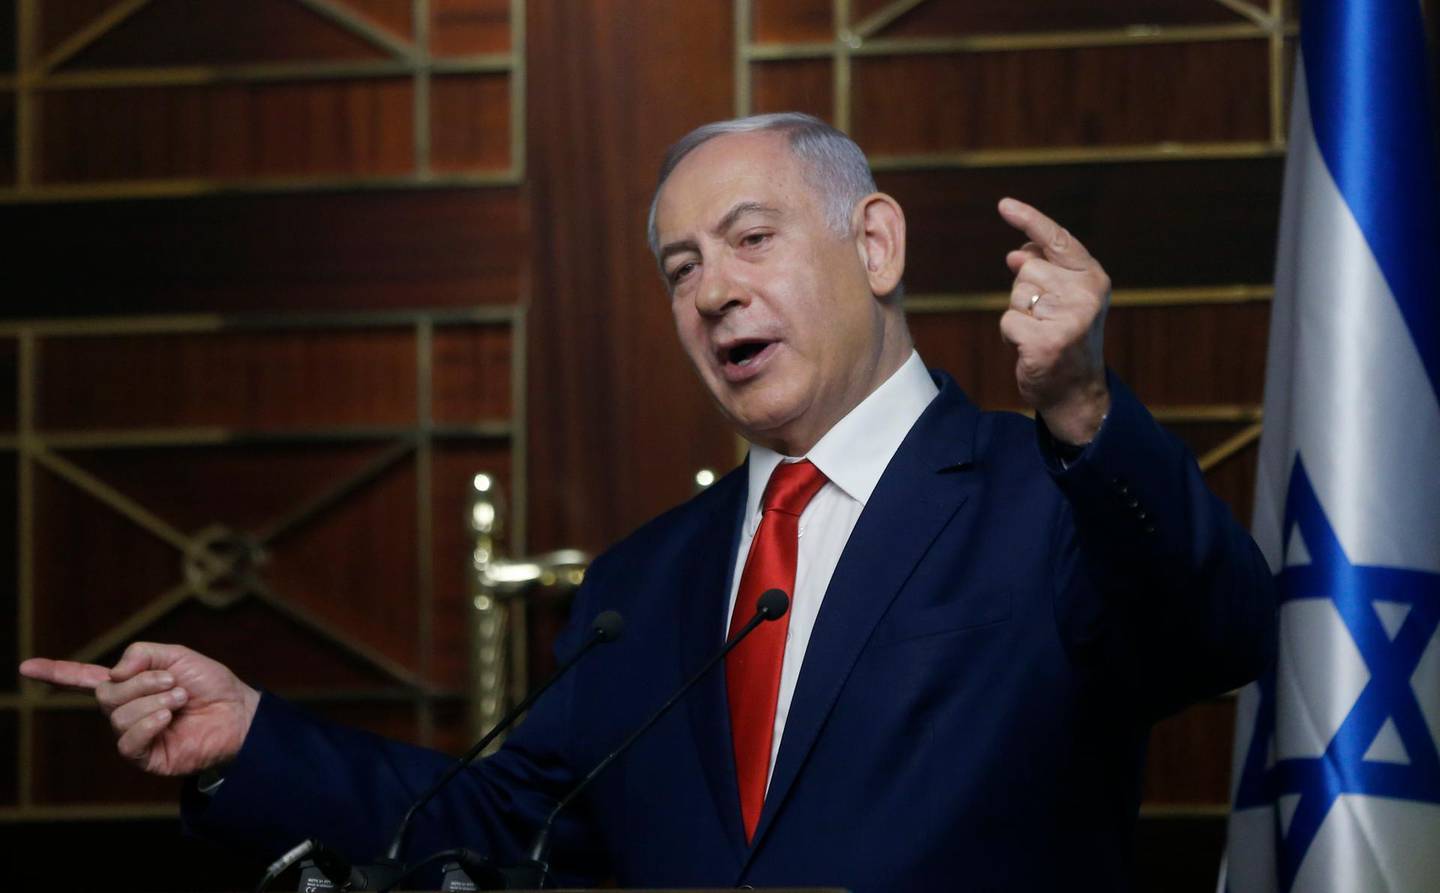 FILE - In this Tuesday, Aug. 20, 2019 file photo, Israeli Prime Minister Benjamin Netanyahu delivers a speech in Kyiv, Ukraine. The long shadow war between Israel and Iran has burst into the open in recent days, with Israel allegedly striking Iran-linked targets as far away as Iraq and crash-landing two drones in Lebanon. These incidents, along with an air raid in Syria that Israel says thwarted an imminent Iranian drone attack, have raised tensions at a particularly fraught time. (AP Photo/Efrem Lukatsky, File)